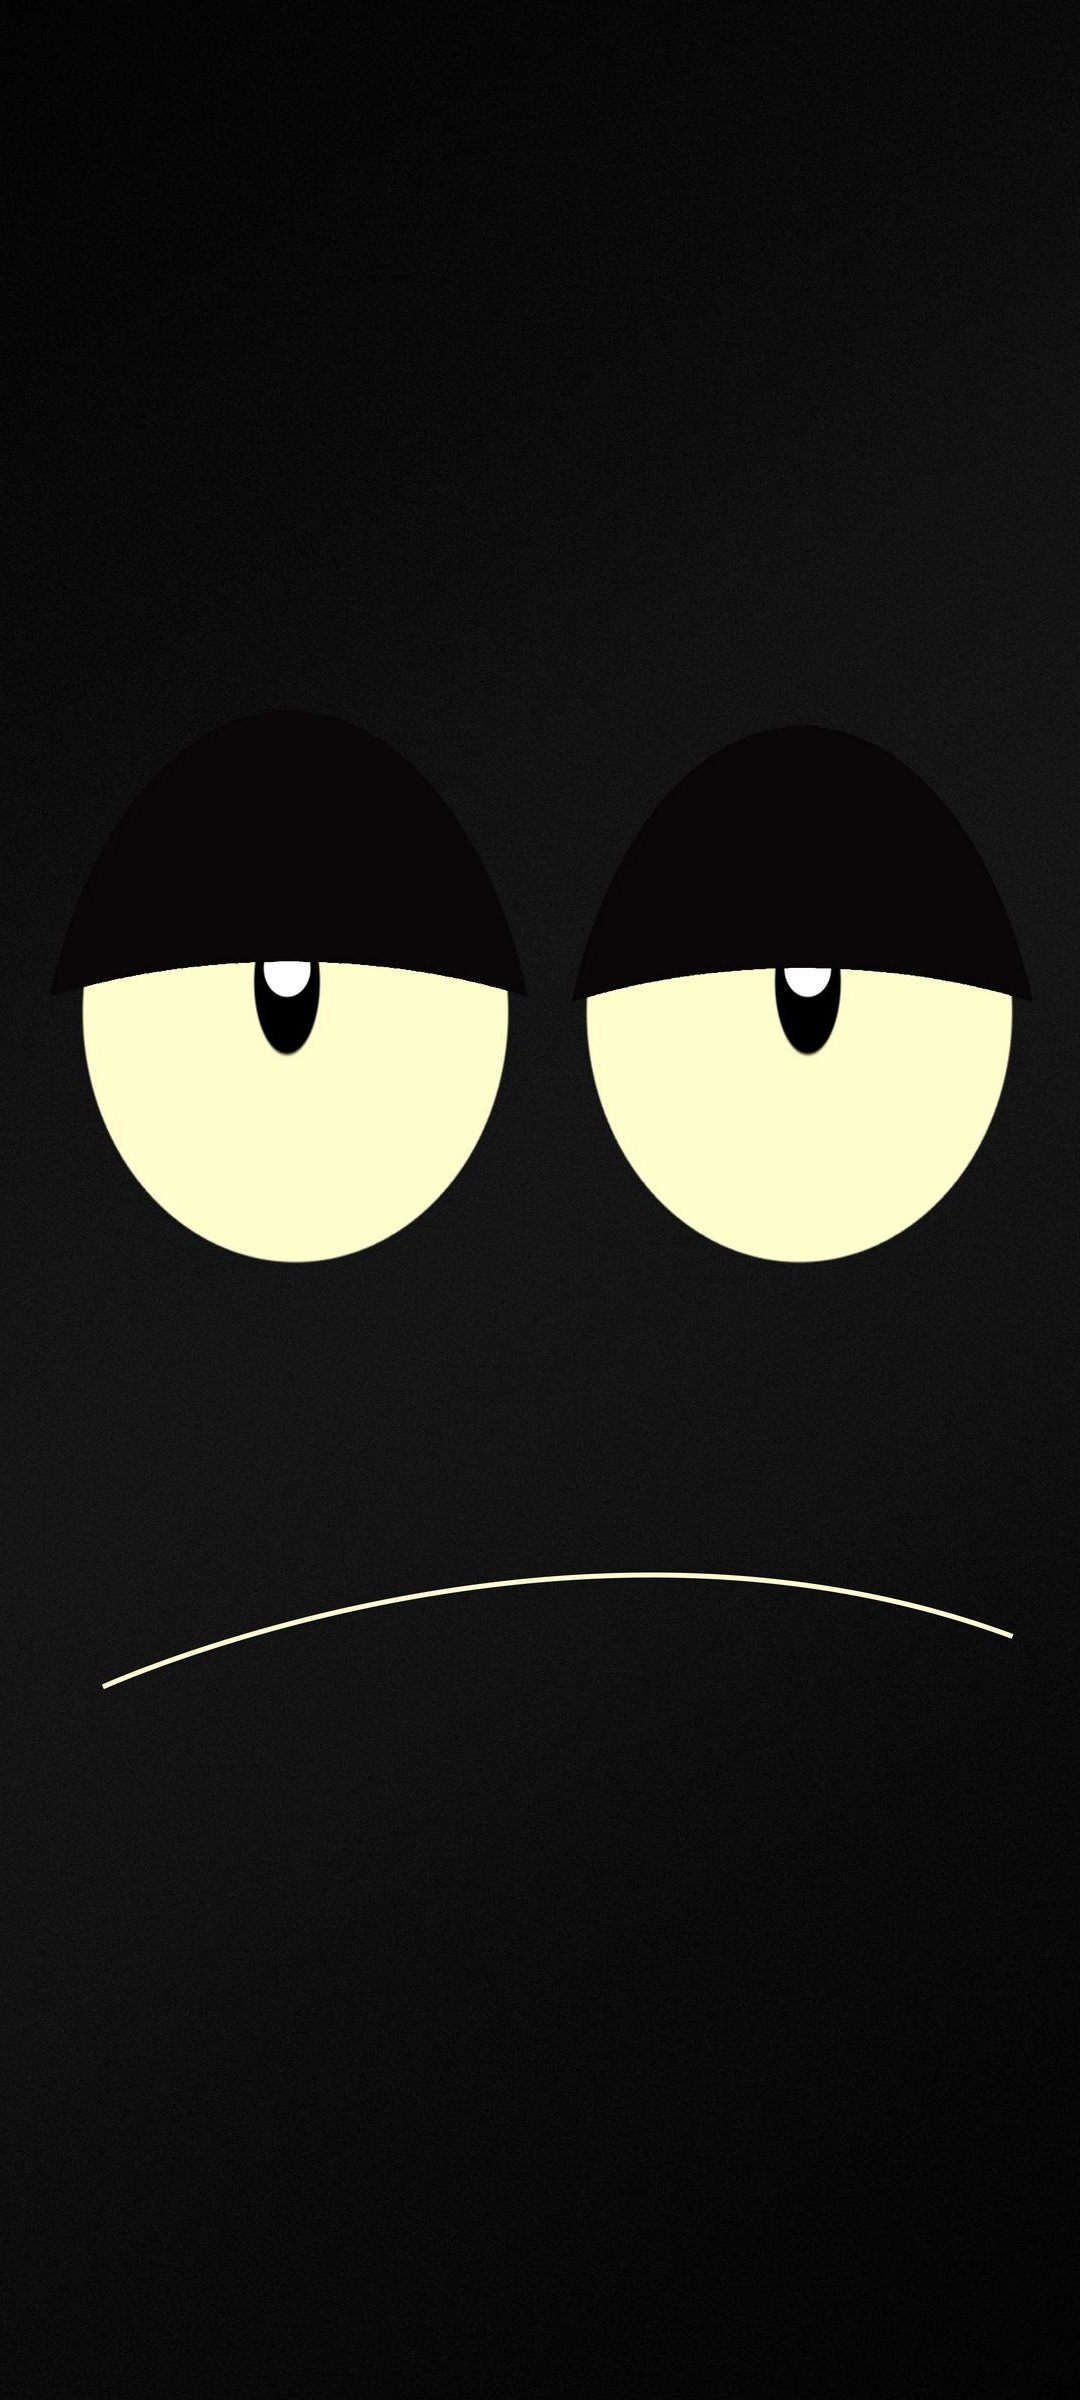 Vector Amoled Black Sad Angry Face Wallpaper – S159 - Chill-out Wallpapers